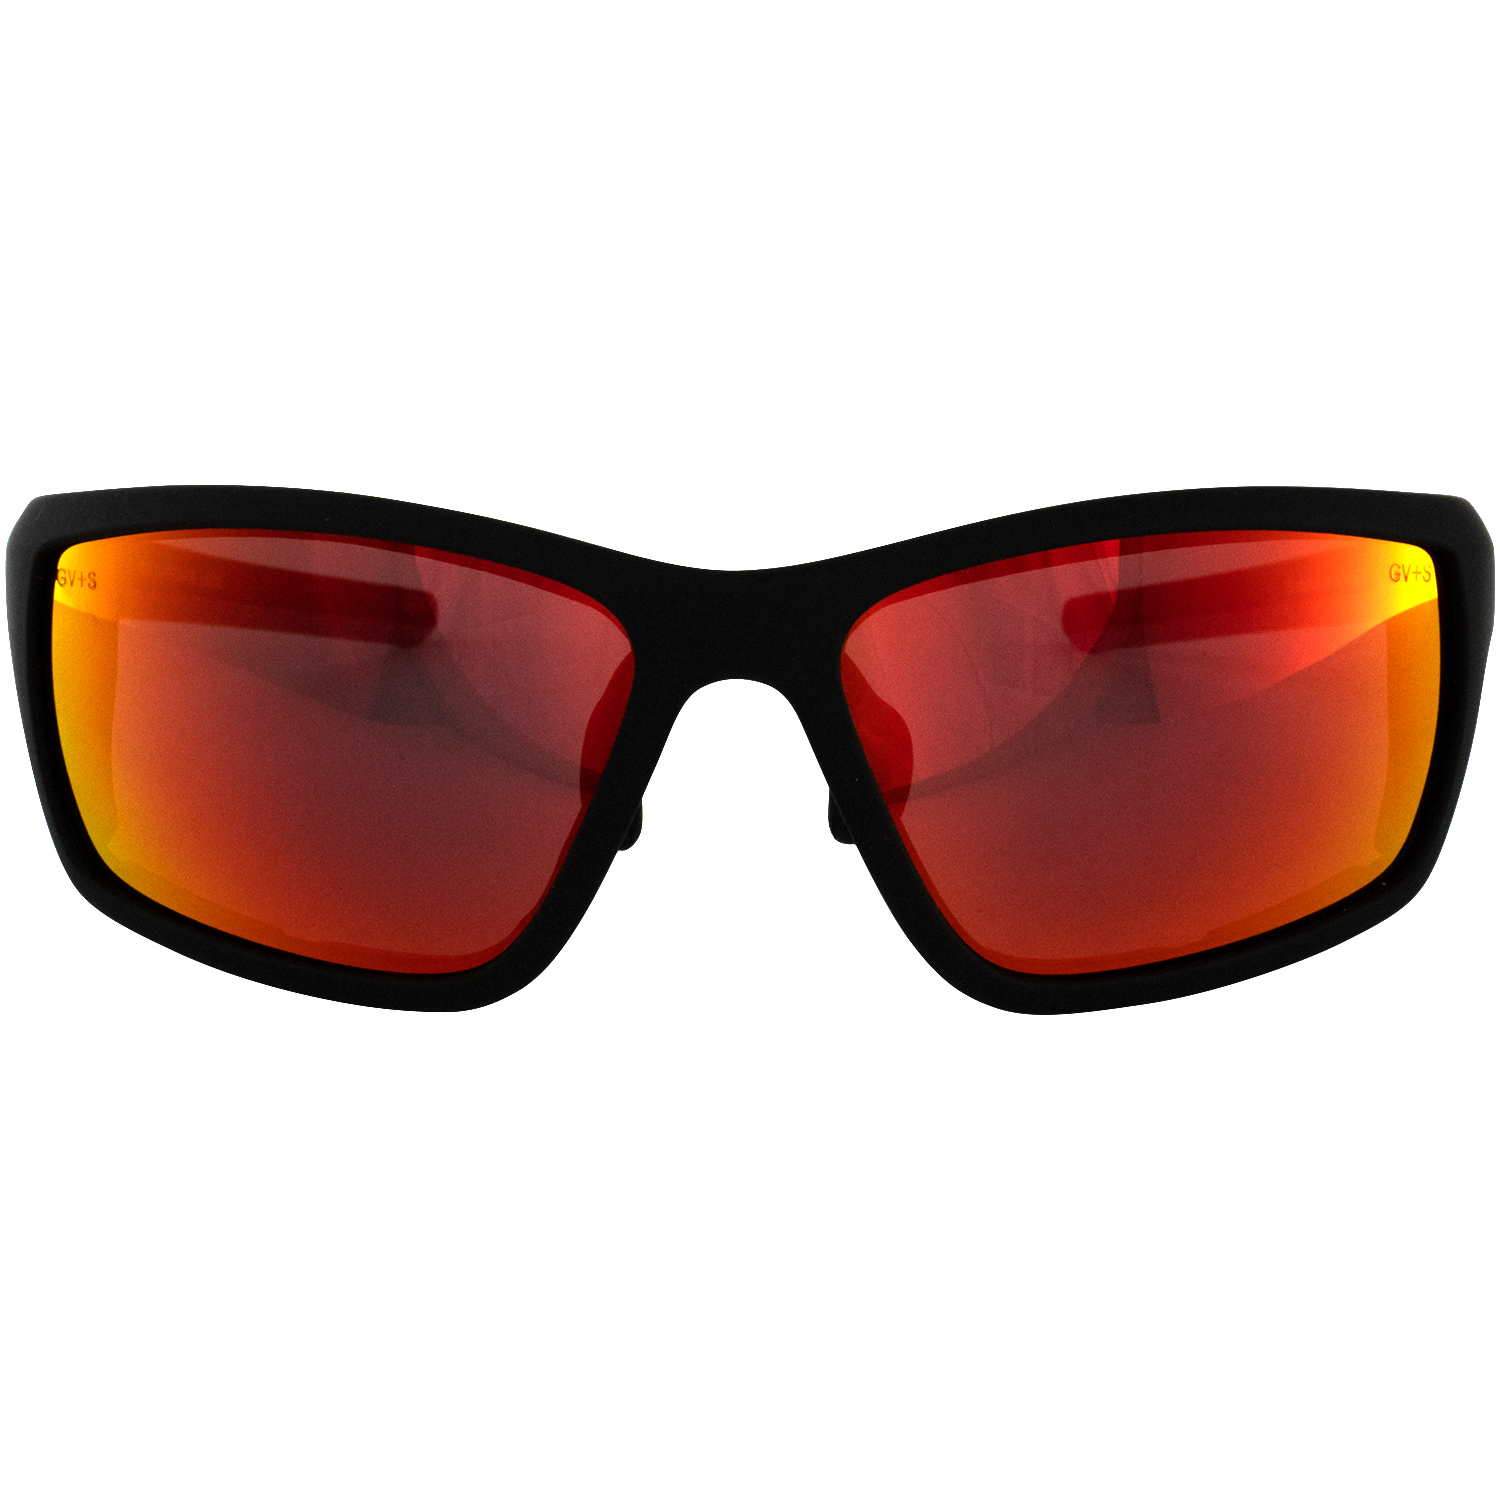 Global Vision Eyewear Kinetic Foam Padded Motorcycle Safety Sunglasses Soft Touch Black Frames with G-Tech Red Mirror Lenses - image 4 of 7